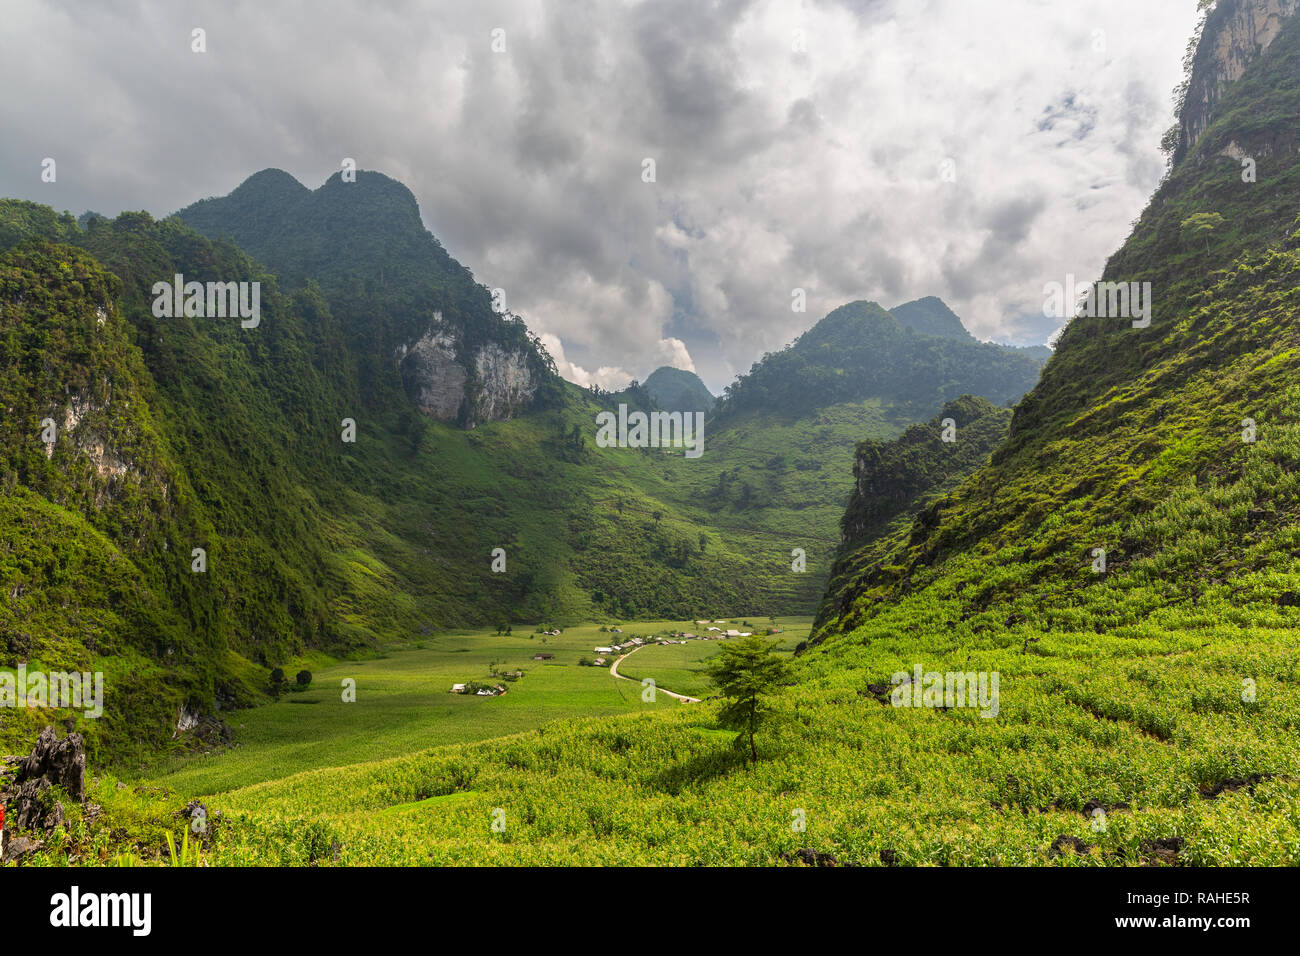 Mountain valley surrounded by fields of corn and rice. Ha Giang Loop, Ha Giang Province, Vietnam, Asia Stock Photo